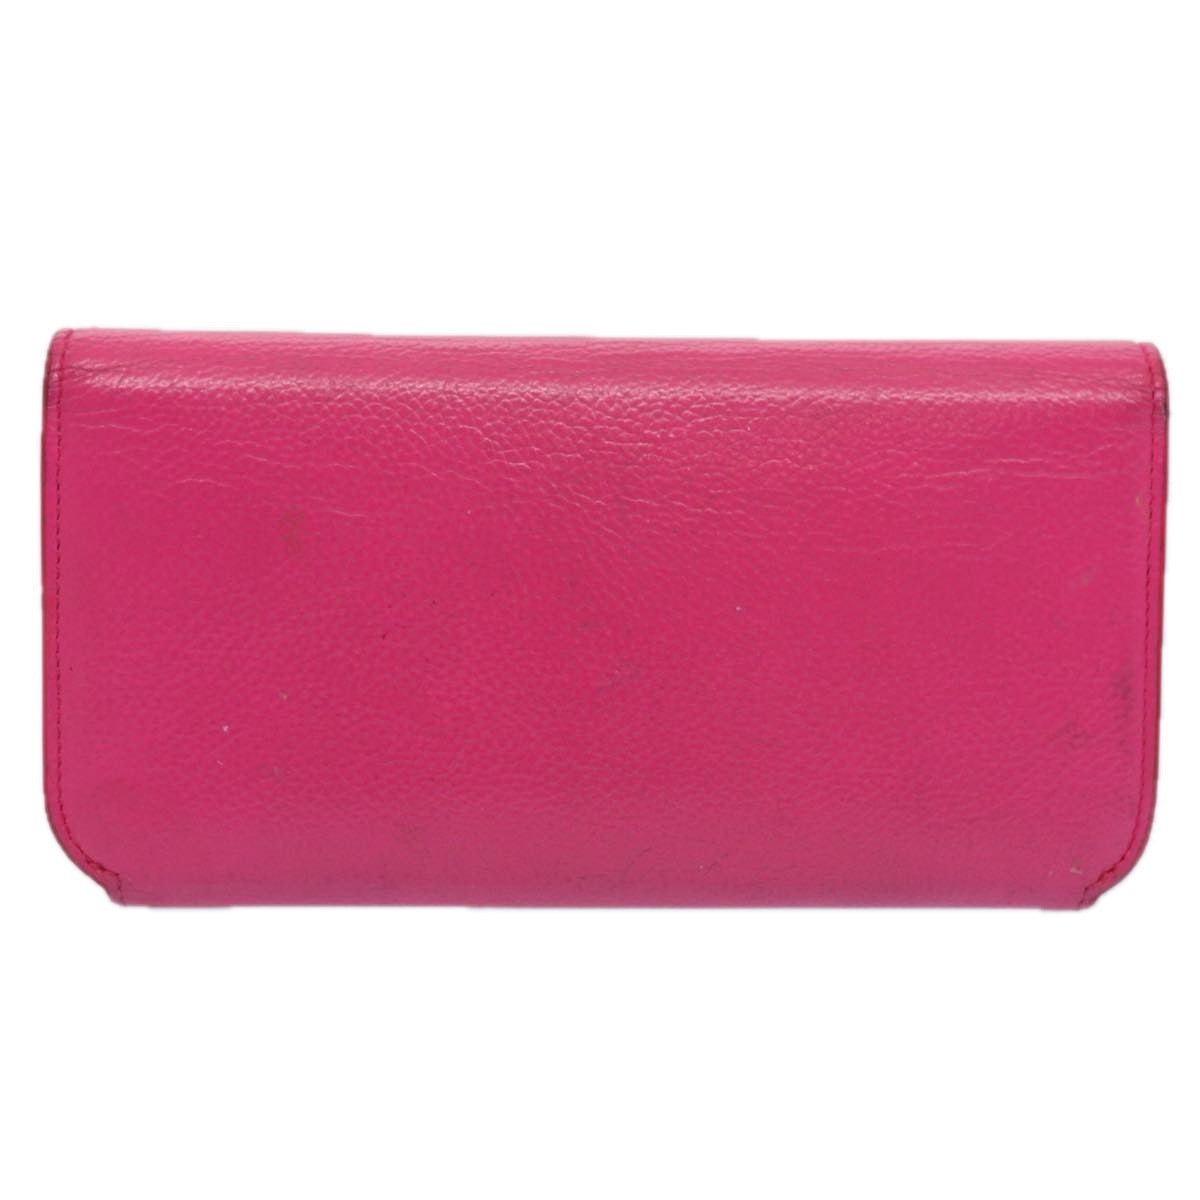 BALENCIAGA Long Wallet Leather Pink 594289 Auth ep2776 - 0